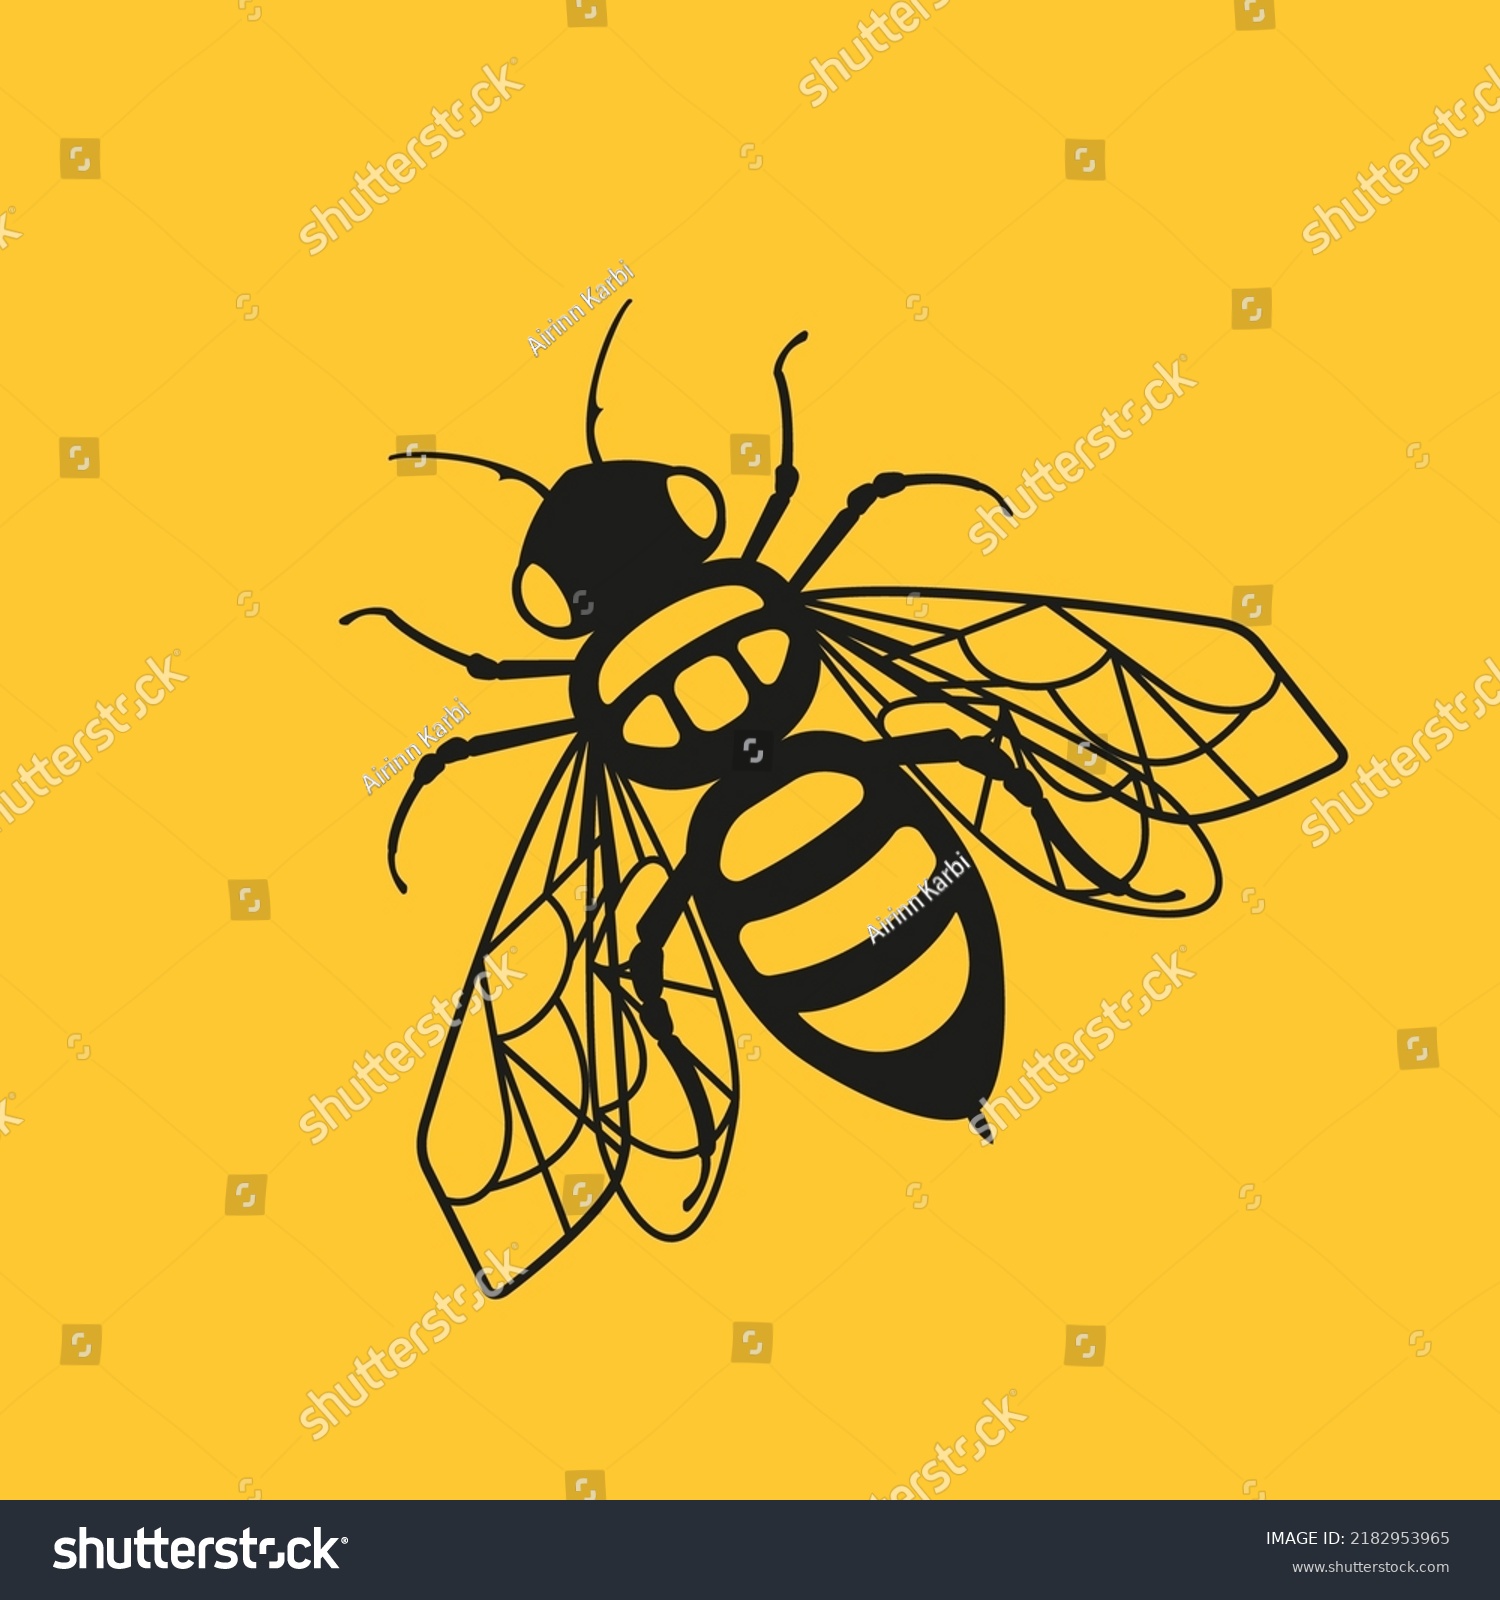 SVG of Honey bee on a yellow isolated background. Bumblebee with transparent wings. SVG file for cutting on a plotter.
Vector illustration. svg